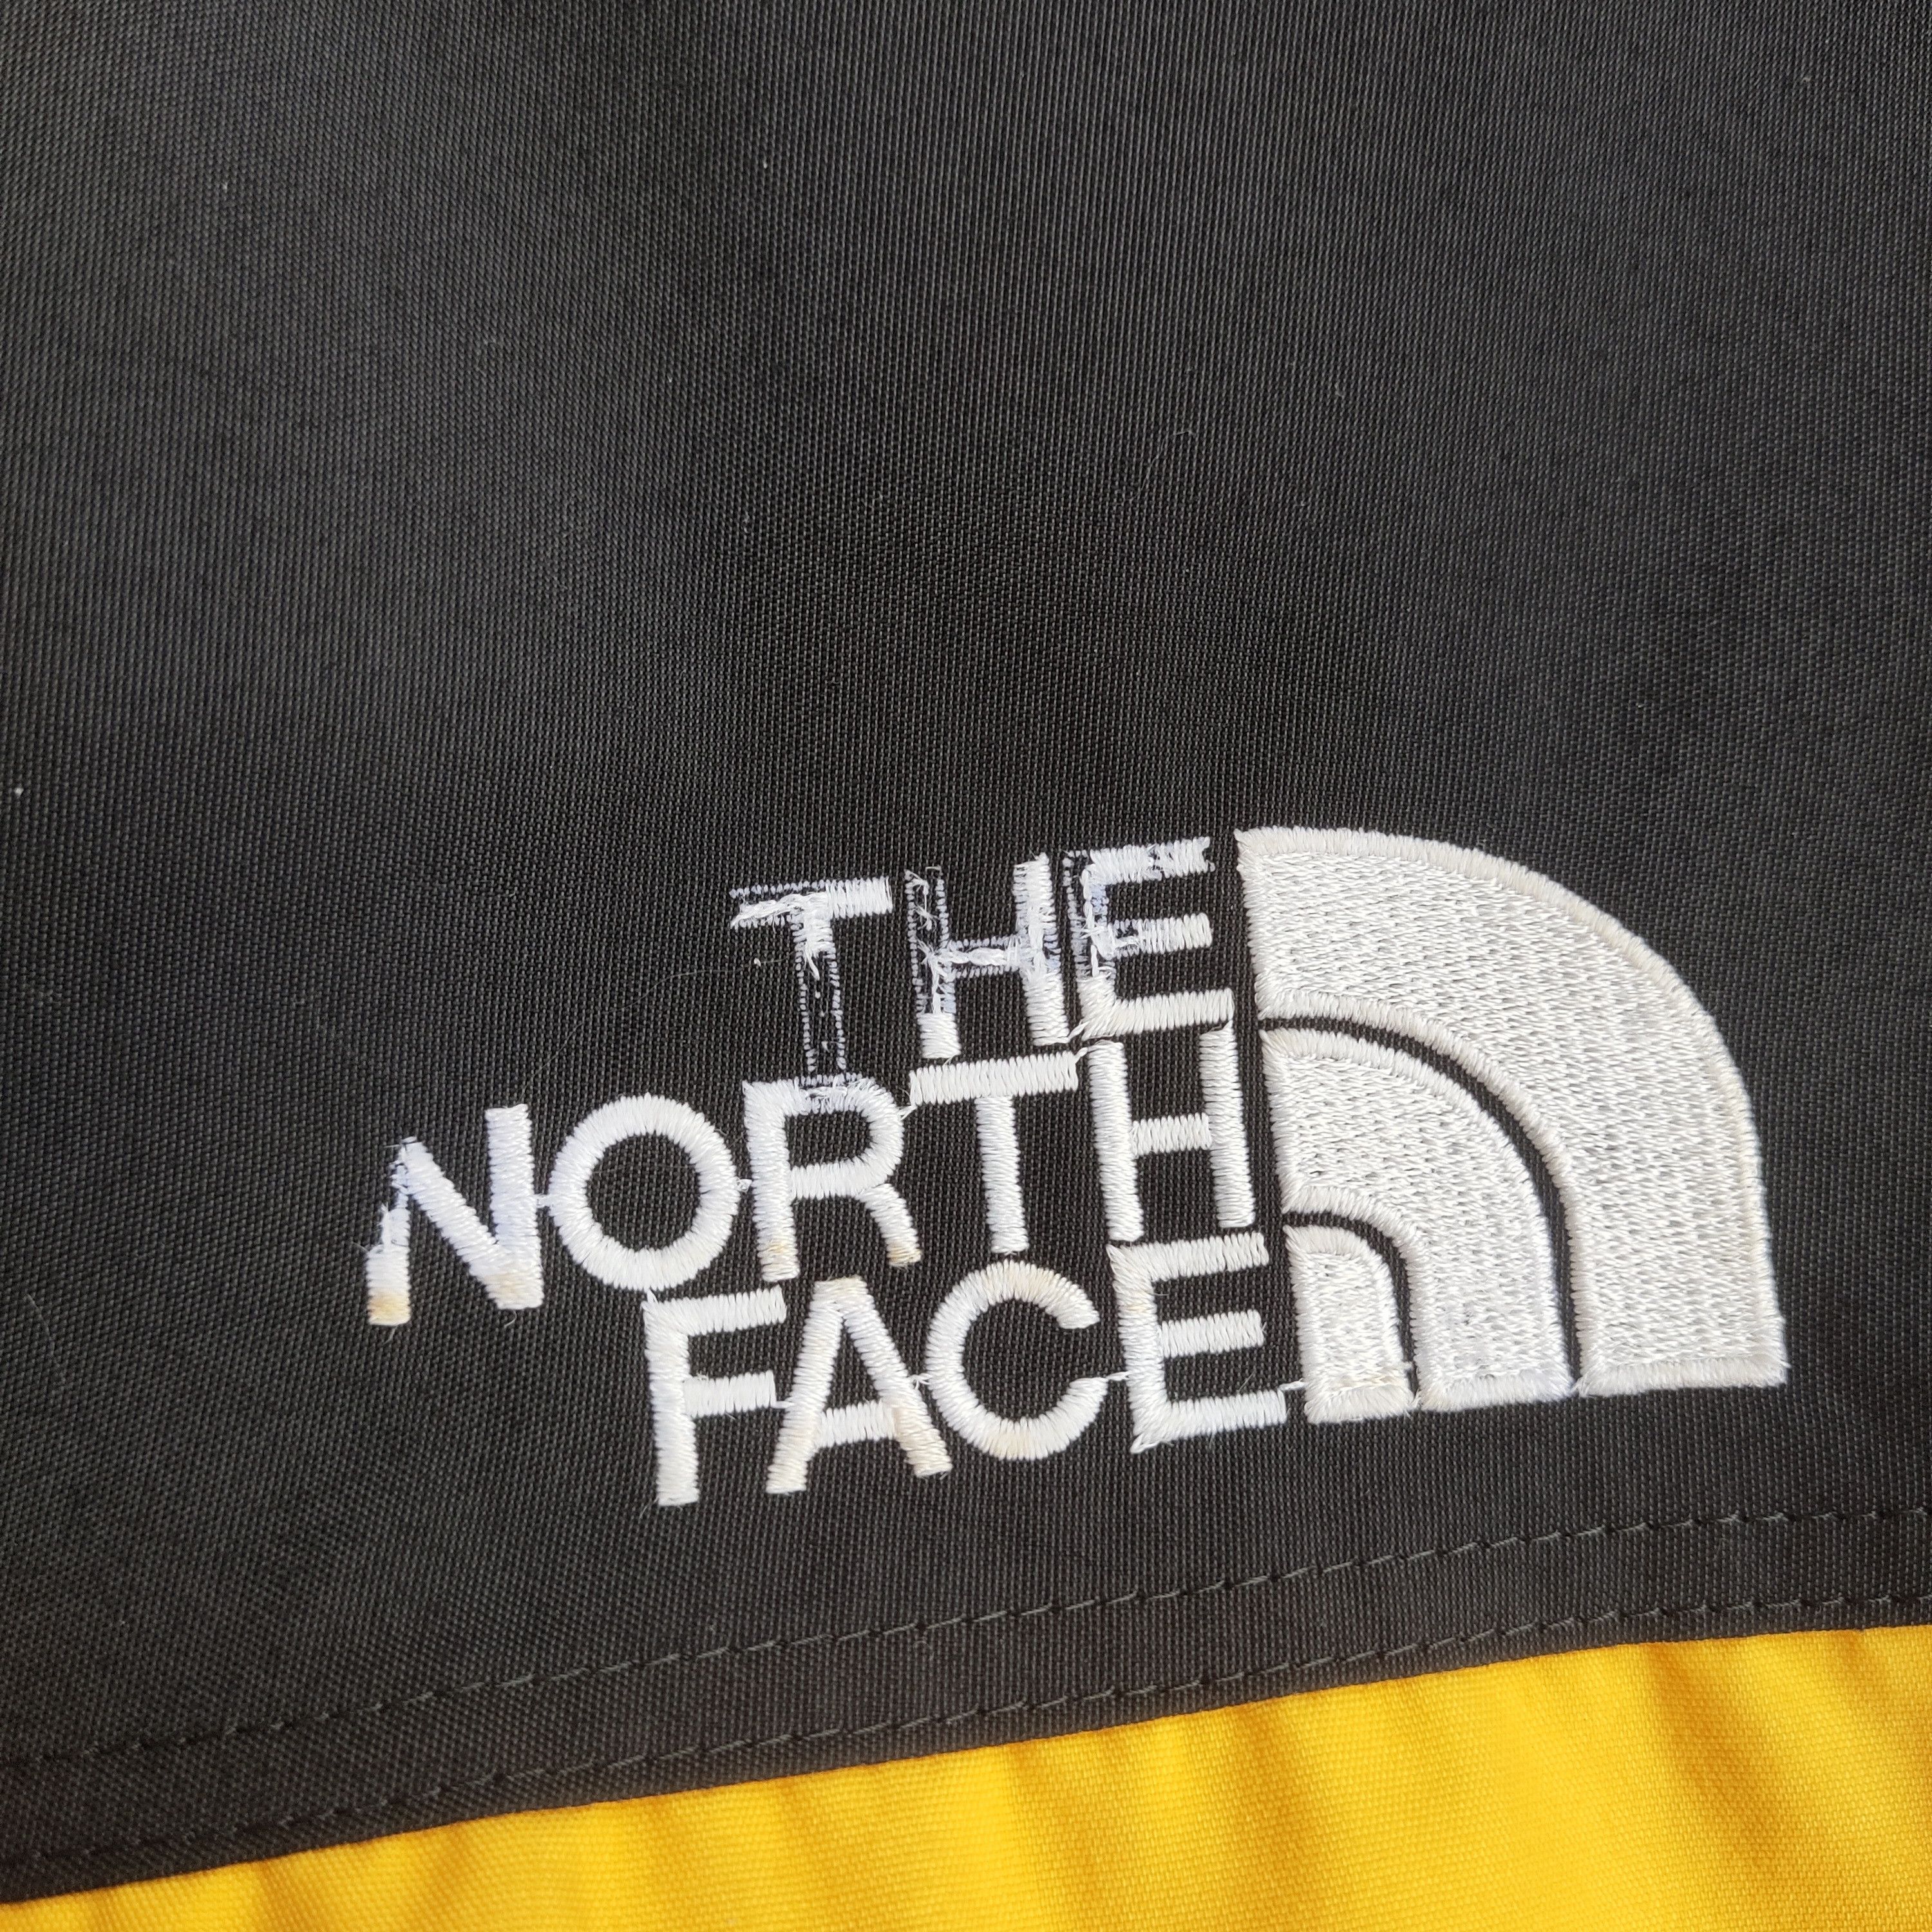 The North Face Vintage North Face Gore-Tex Yellow Jacket Size US M / EU 48-50 / 2 - 12 Preview